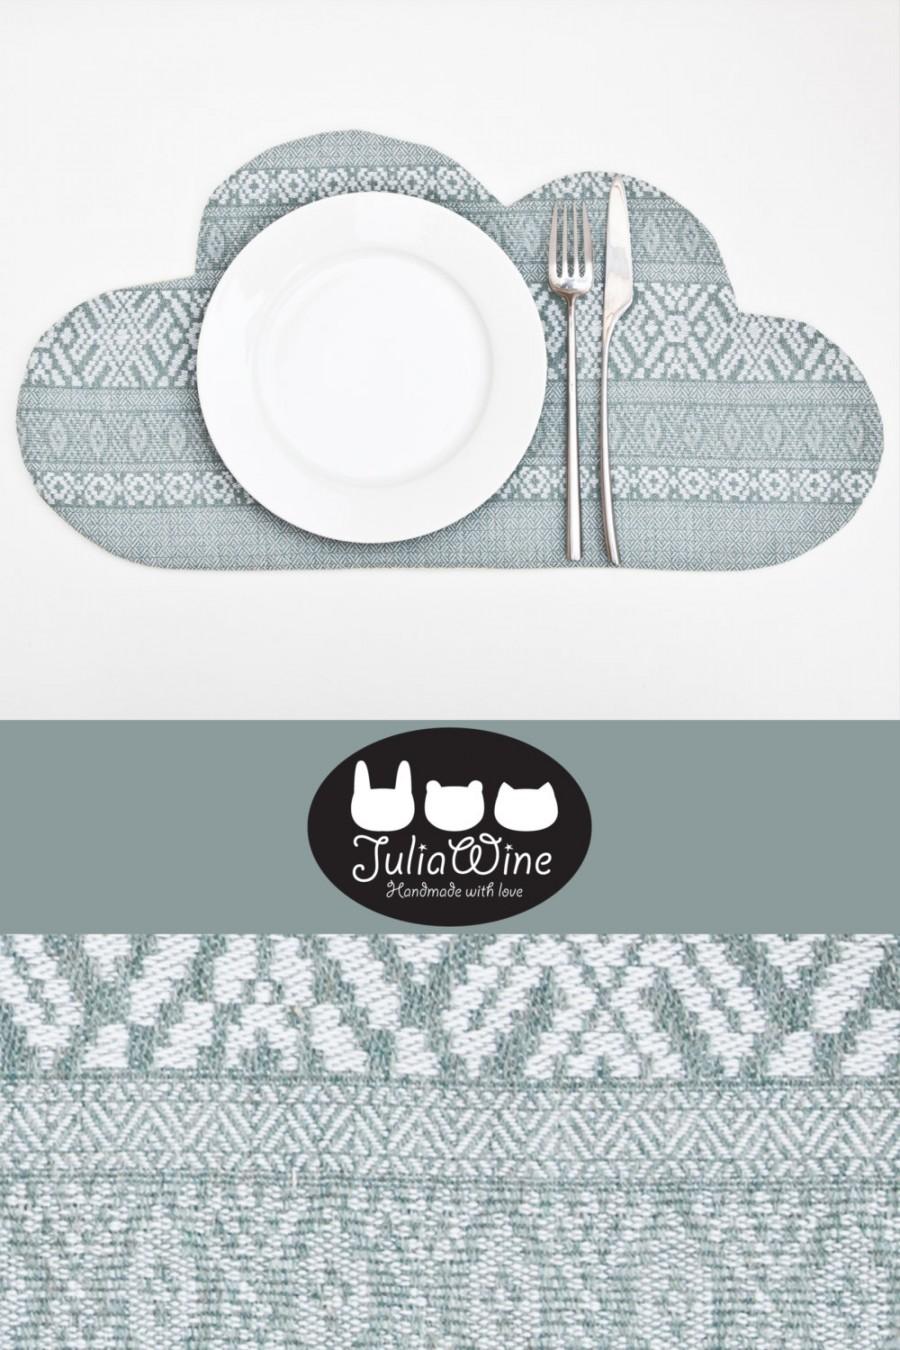 Hochzeit - Tribal Placemat, Cloud Linen Placemat, kitchen decor, Table Linens, Housewarming Gifts, Table Placemats, Mother Day Gift